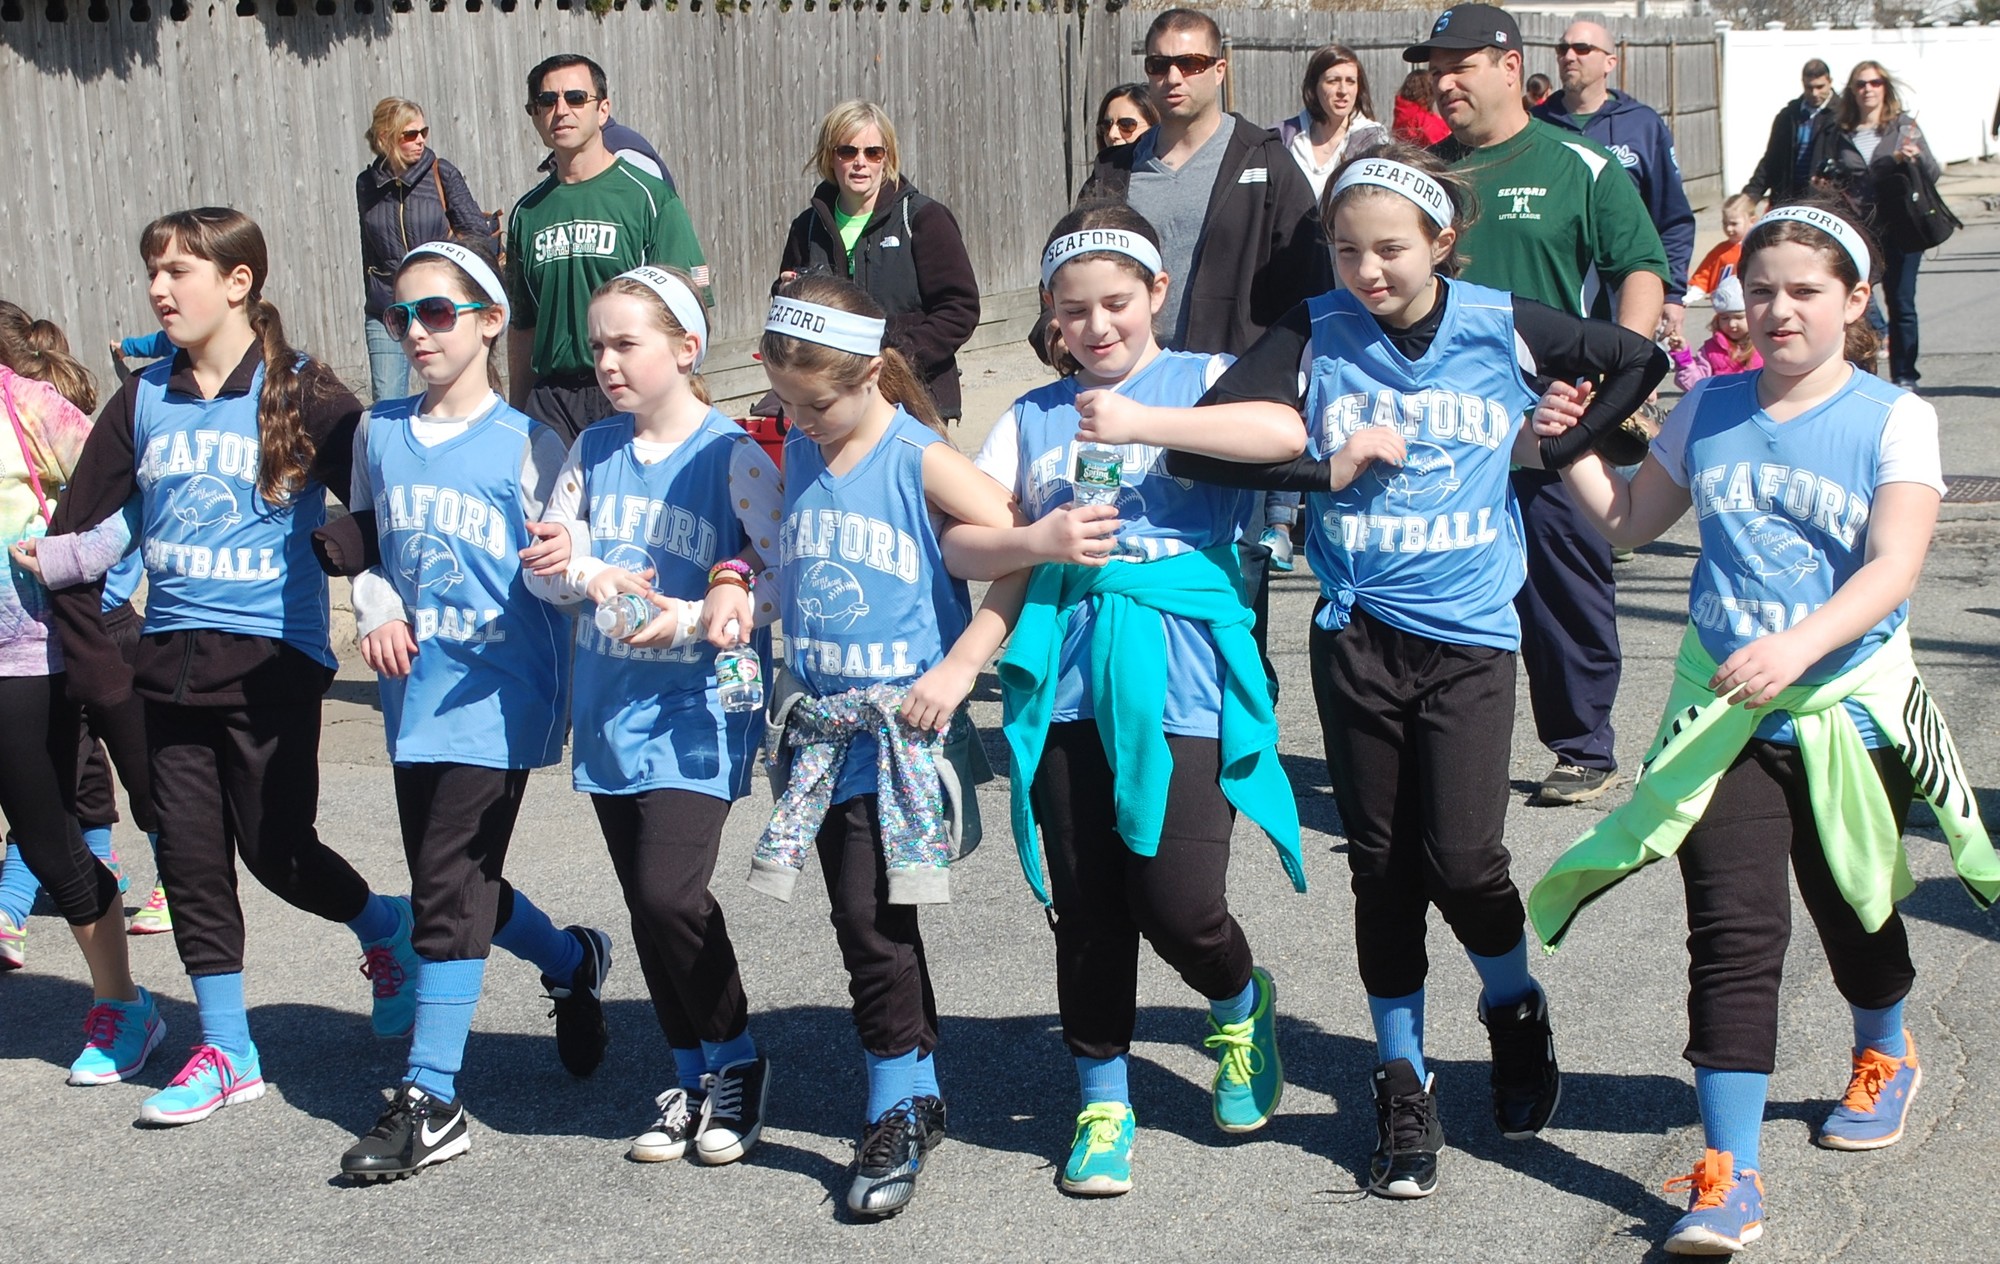 The Seaford Little League kicked off its 2015 season with a parade to Seaman’s Neck Park, where opening ceremonies were held.